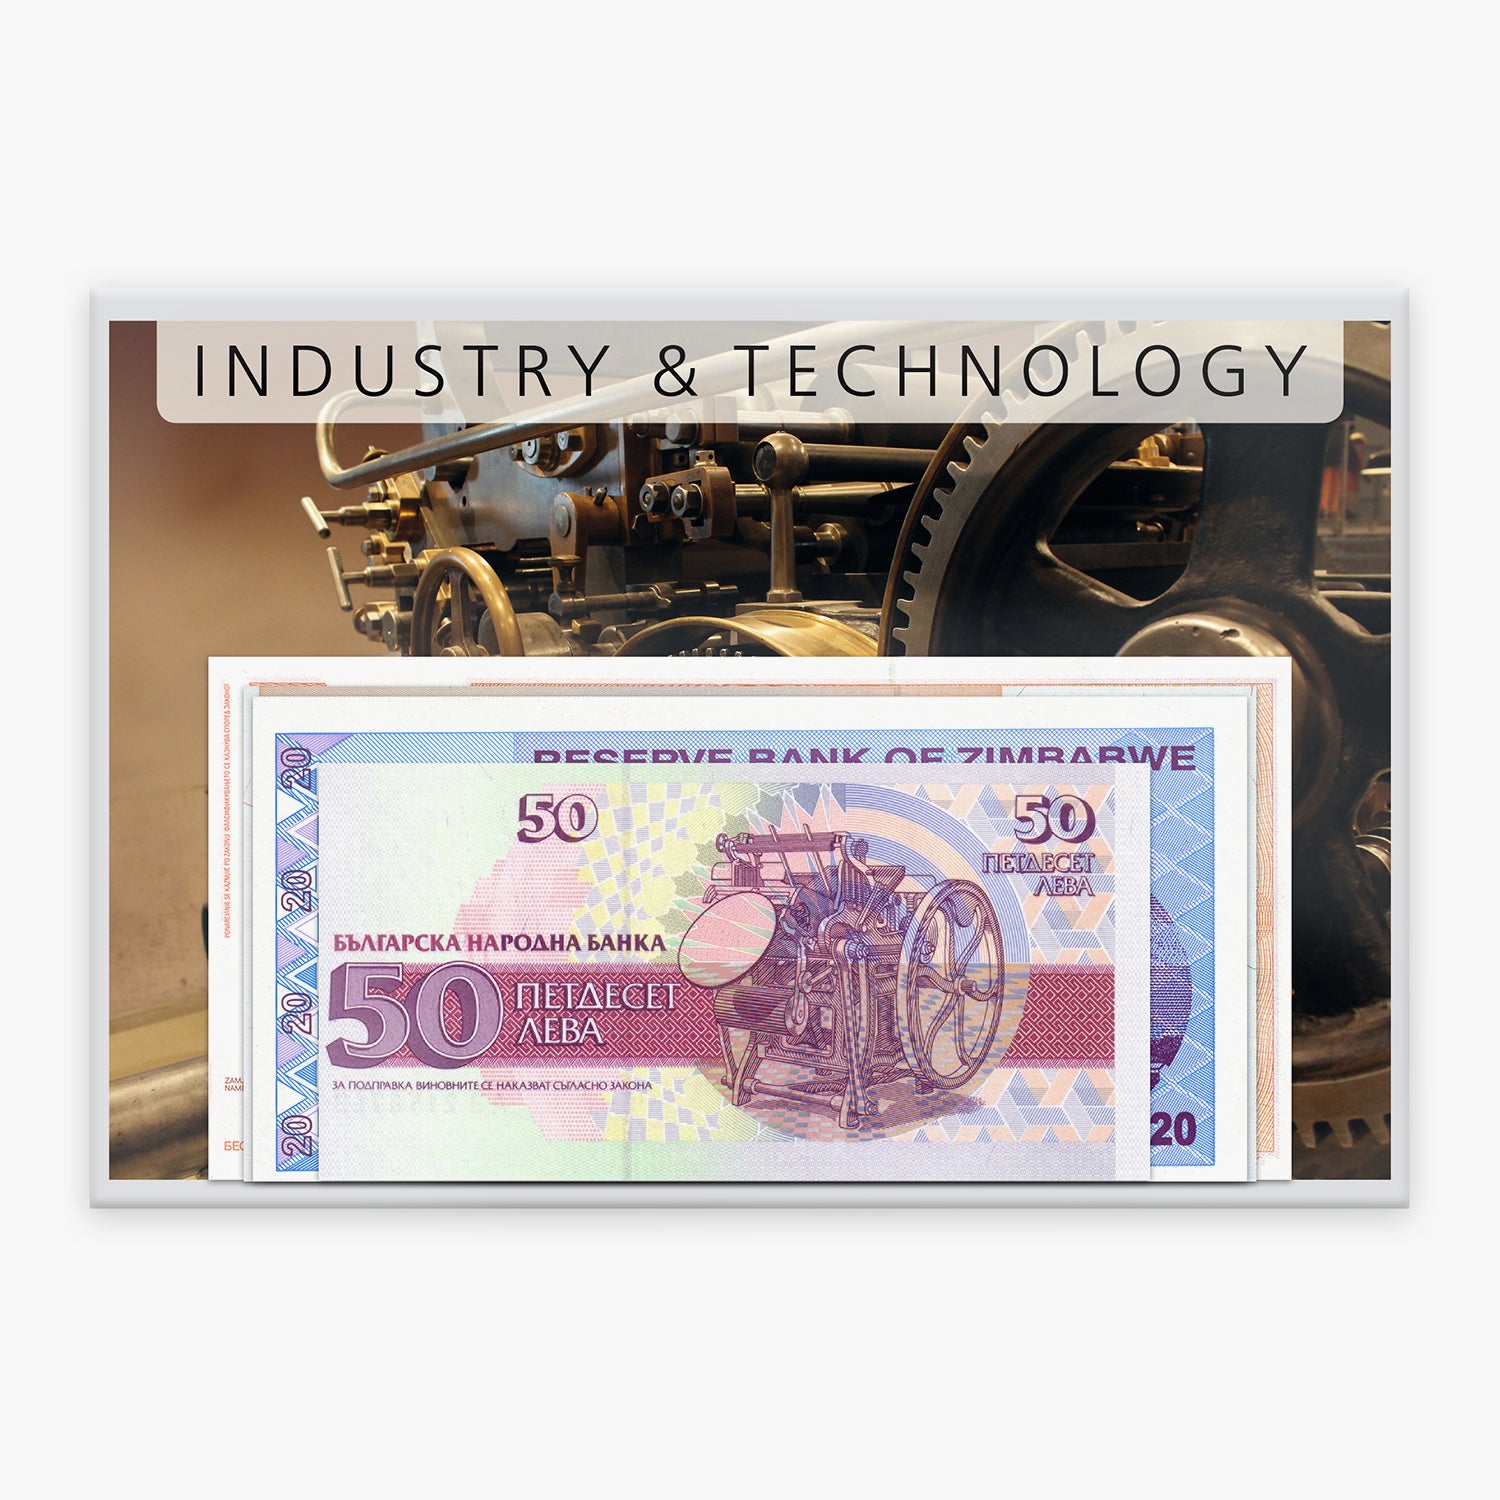 Banknote Collection "Industry & Technology"